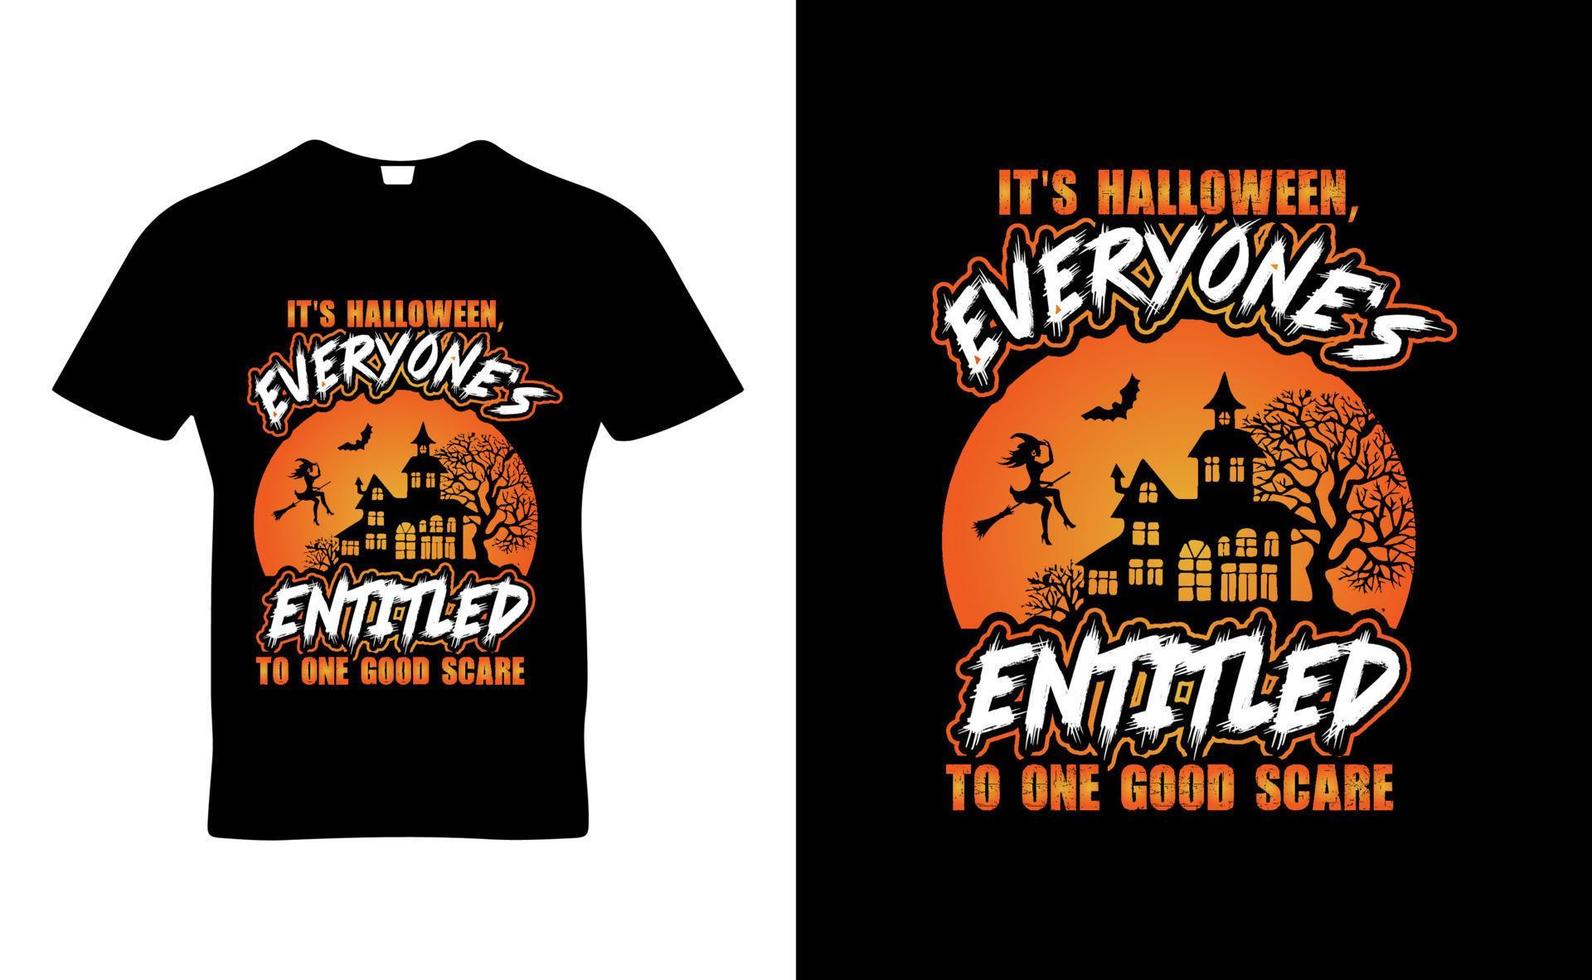 t's Halloween, everyone's entitled to one good scare quote t-shirt template design vector